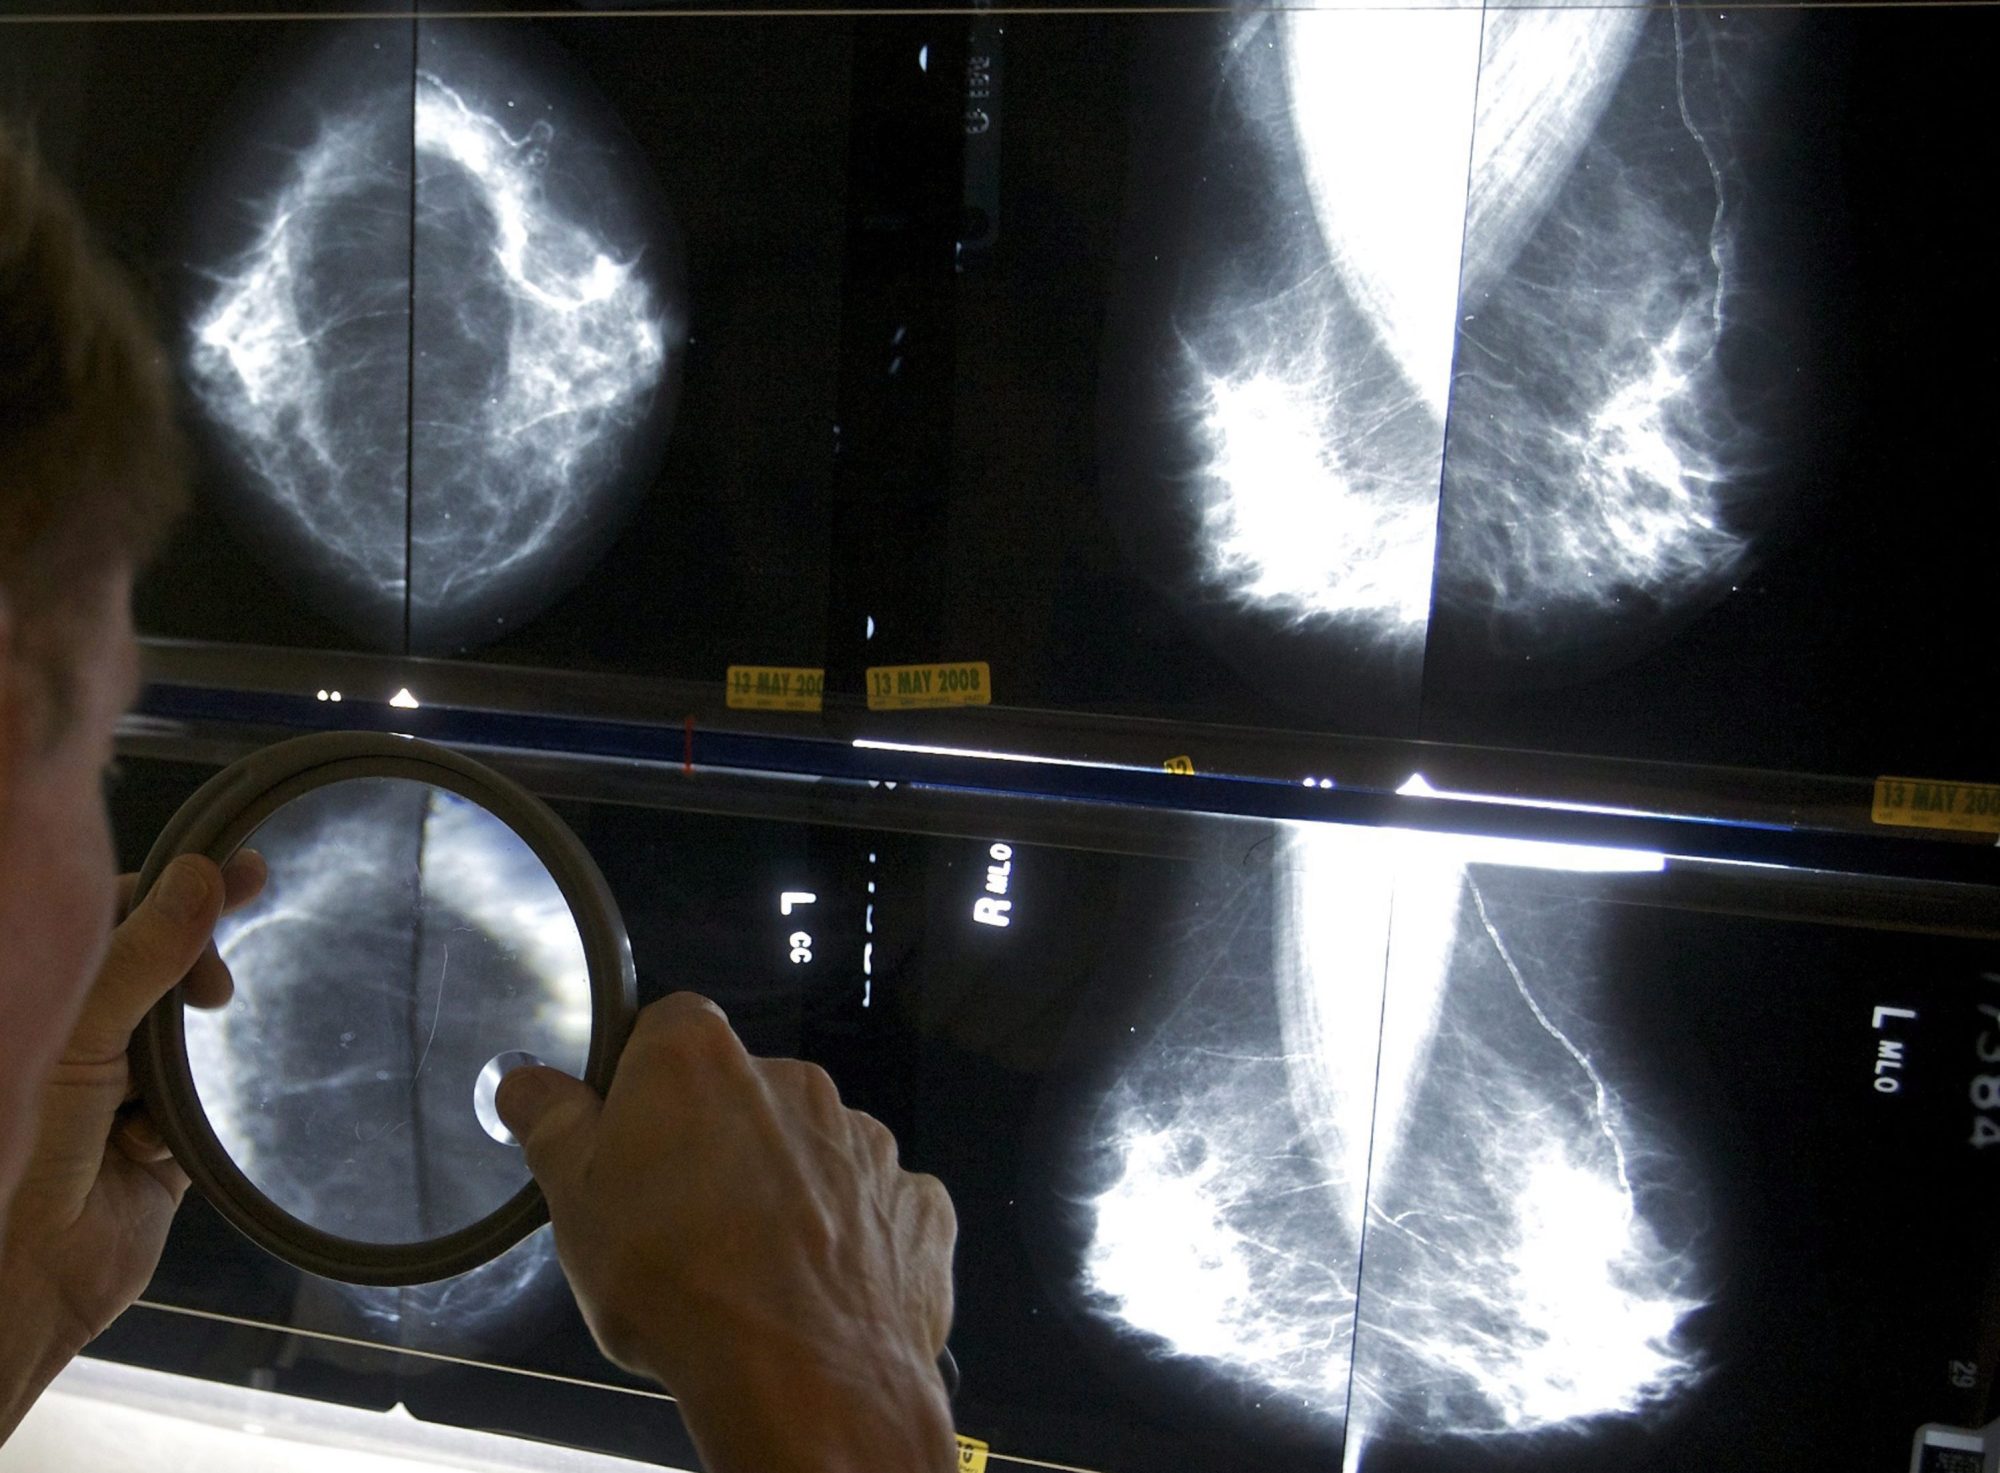 Breast cancer: Free screening has now been expanded to include Quebec women aged 70 to 74 years